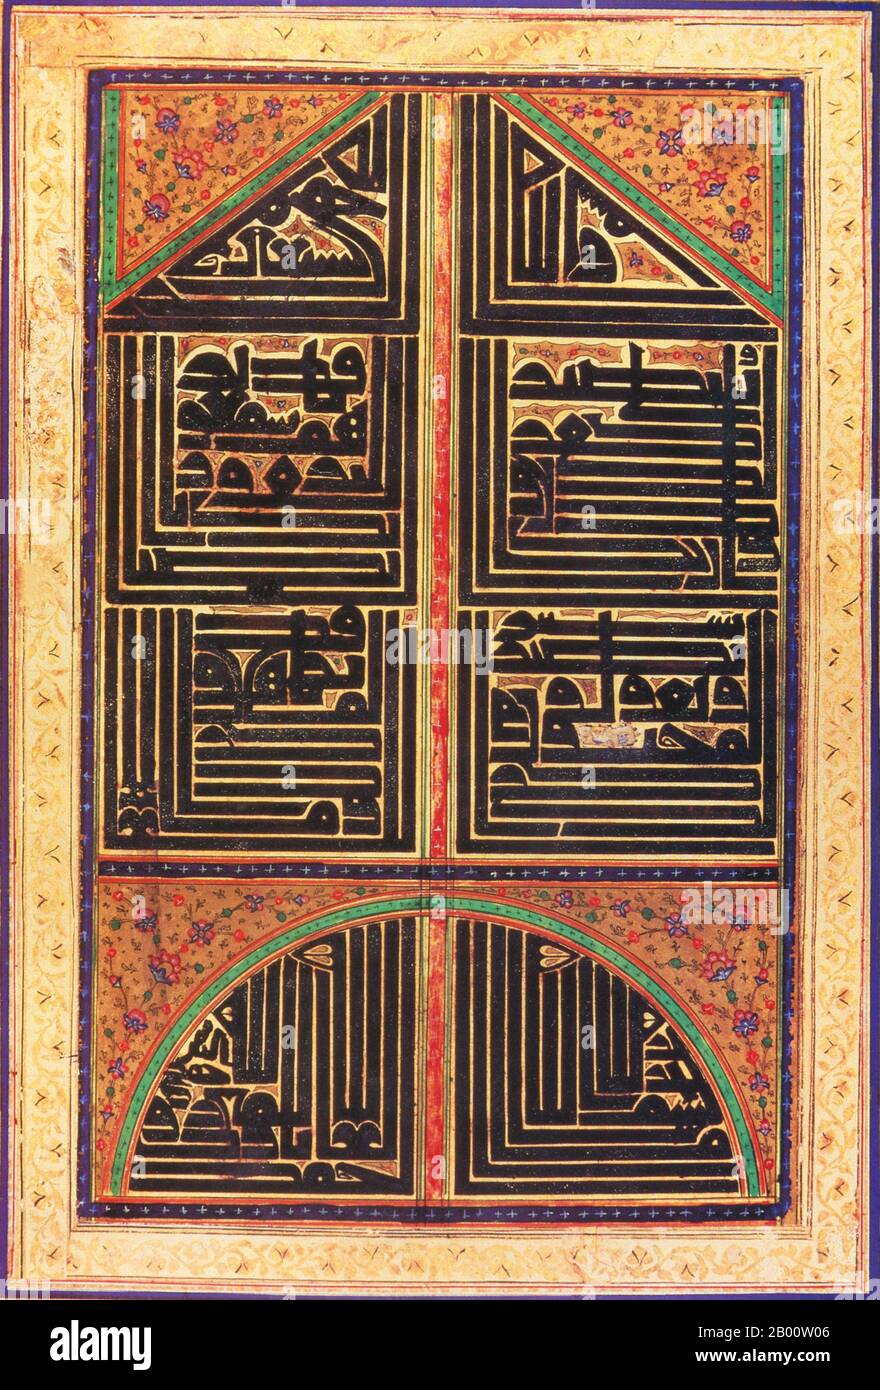 India: A 18th or 19th-century rendition from India of a page from Sura LXVIII of the Qur’an, stylized in Kufic script into the shape of a ‘mihrab’, or prayer niche.  A mihrab, or maharib, is a niche in the wall of a mosque that indicates the qibla—the direction of the Kaaba in Mecca, which is the direction that Muslims should face when praying. The wall in which a mihrab is located is called the ‘qibla wall’. Stock Photo